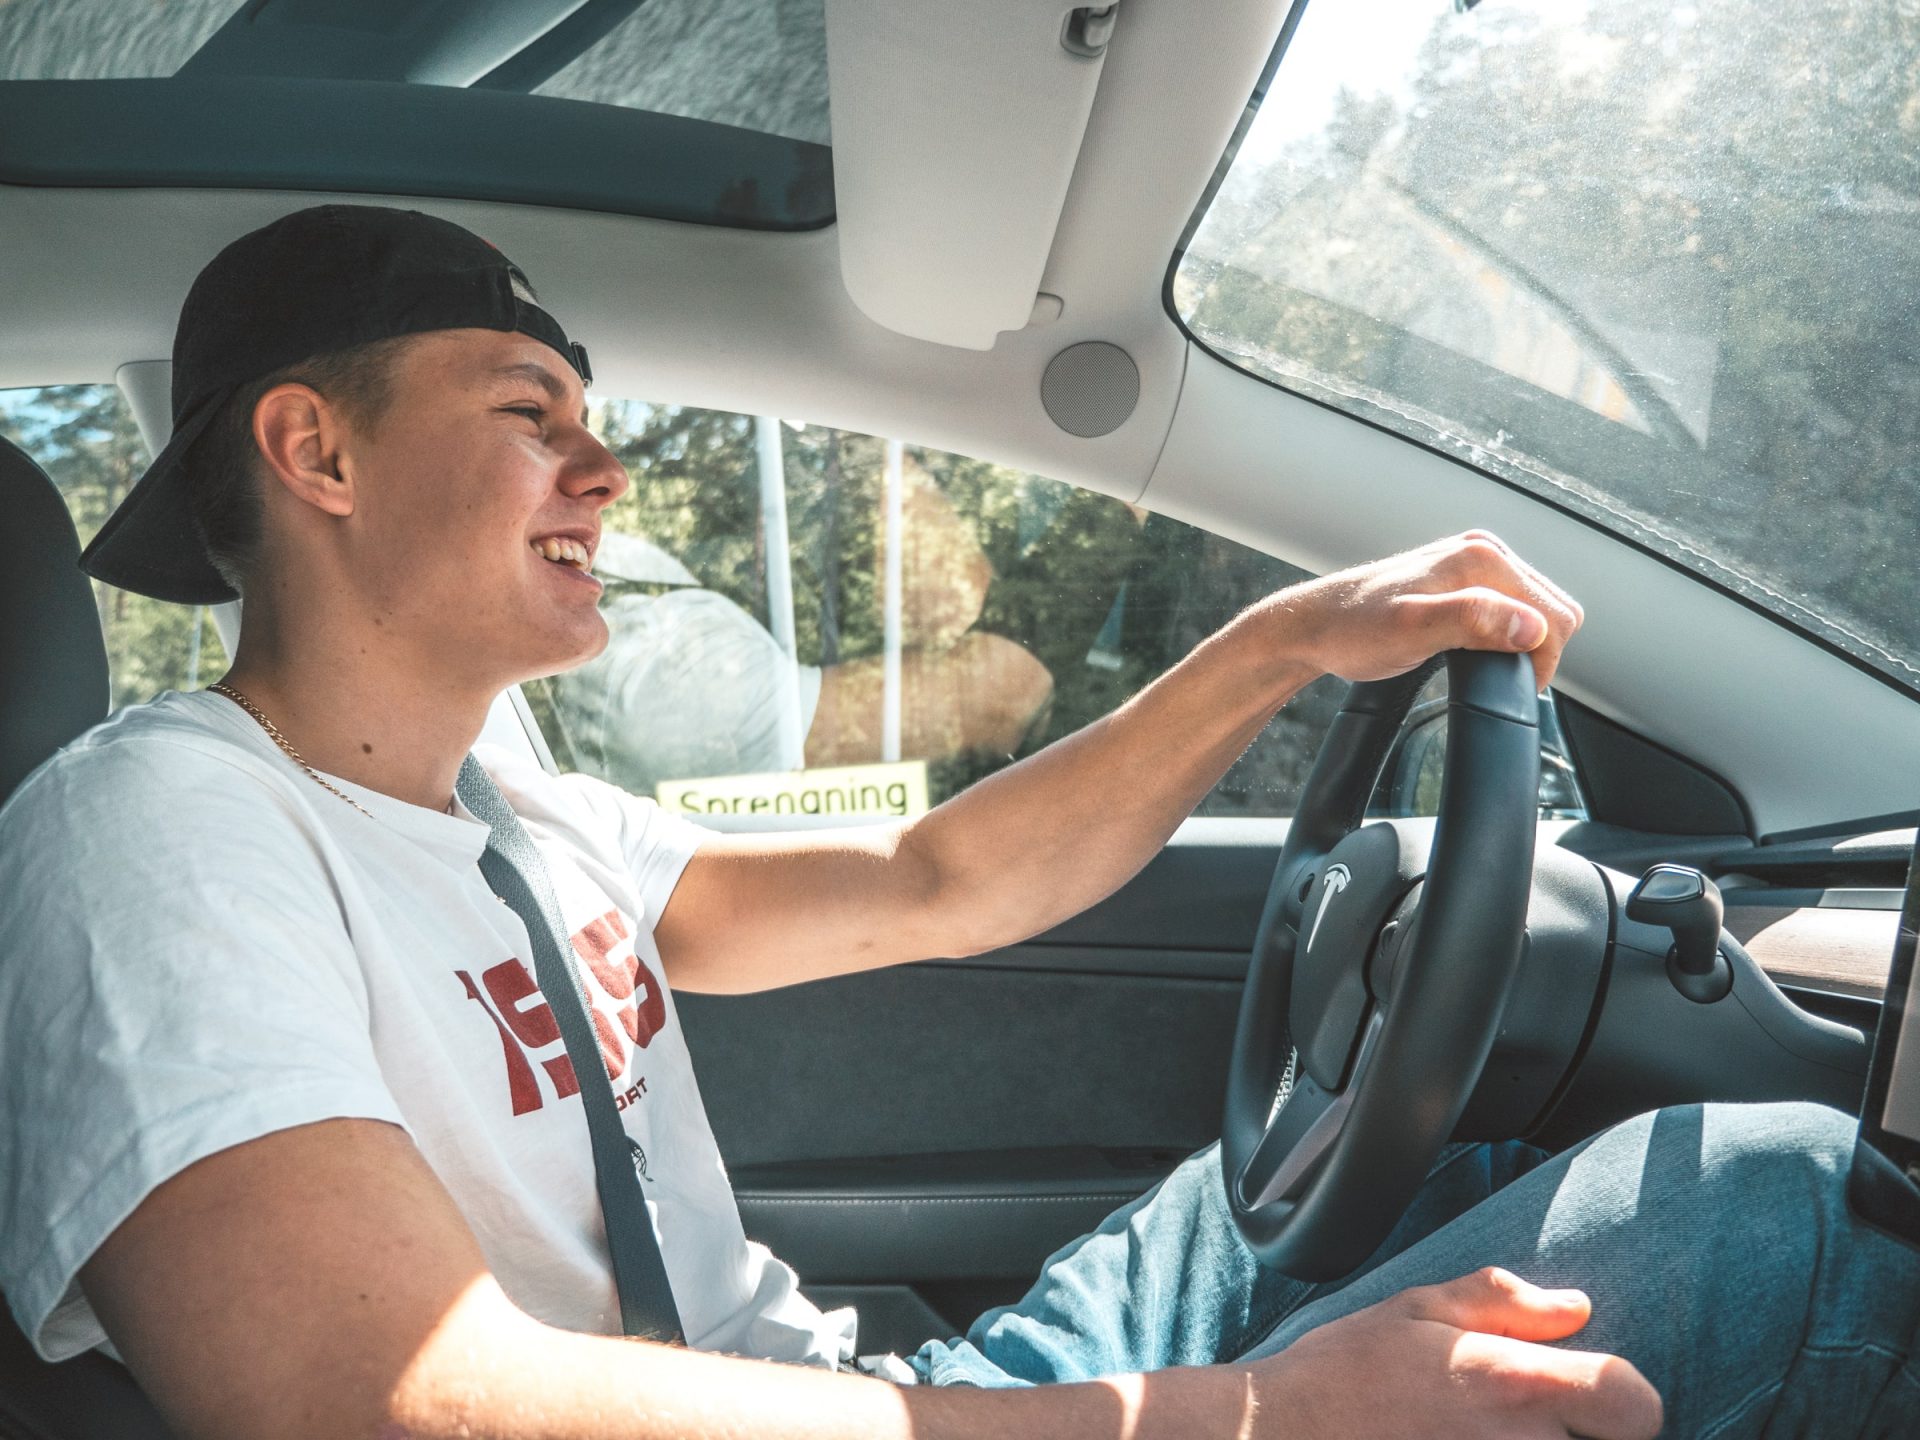 HOW CAN YOU LEASE A CAR FOR A TEENAGER?